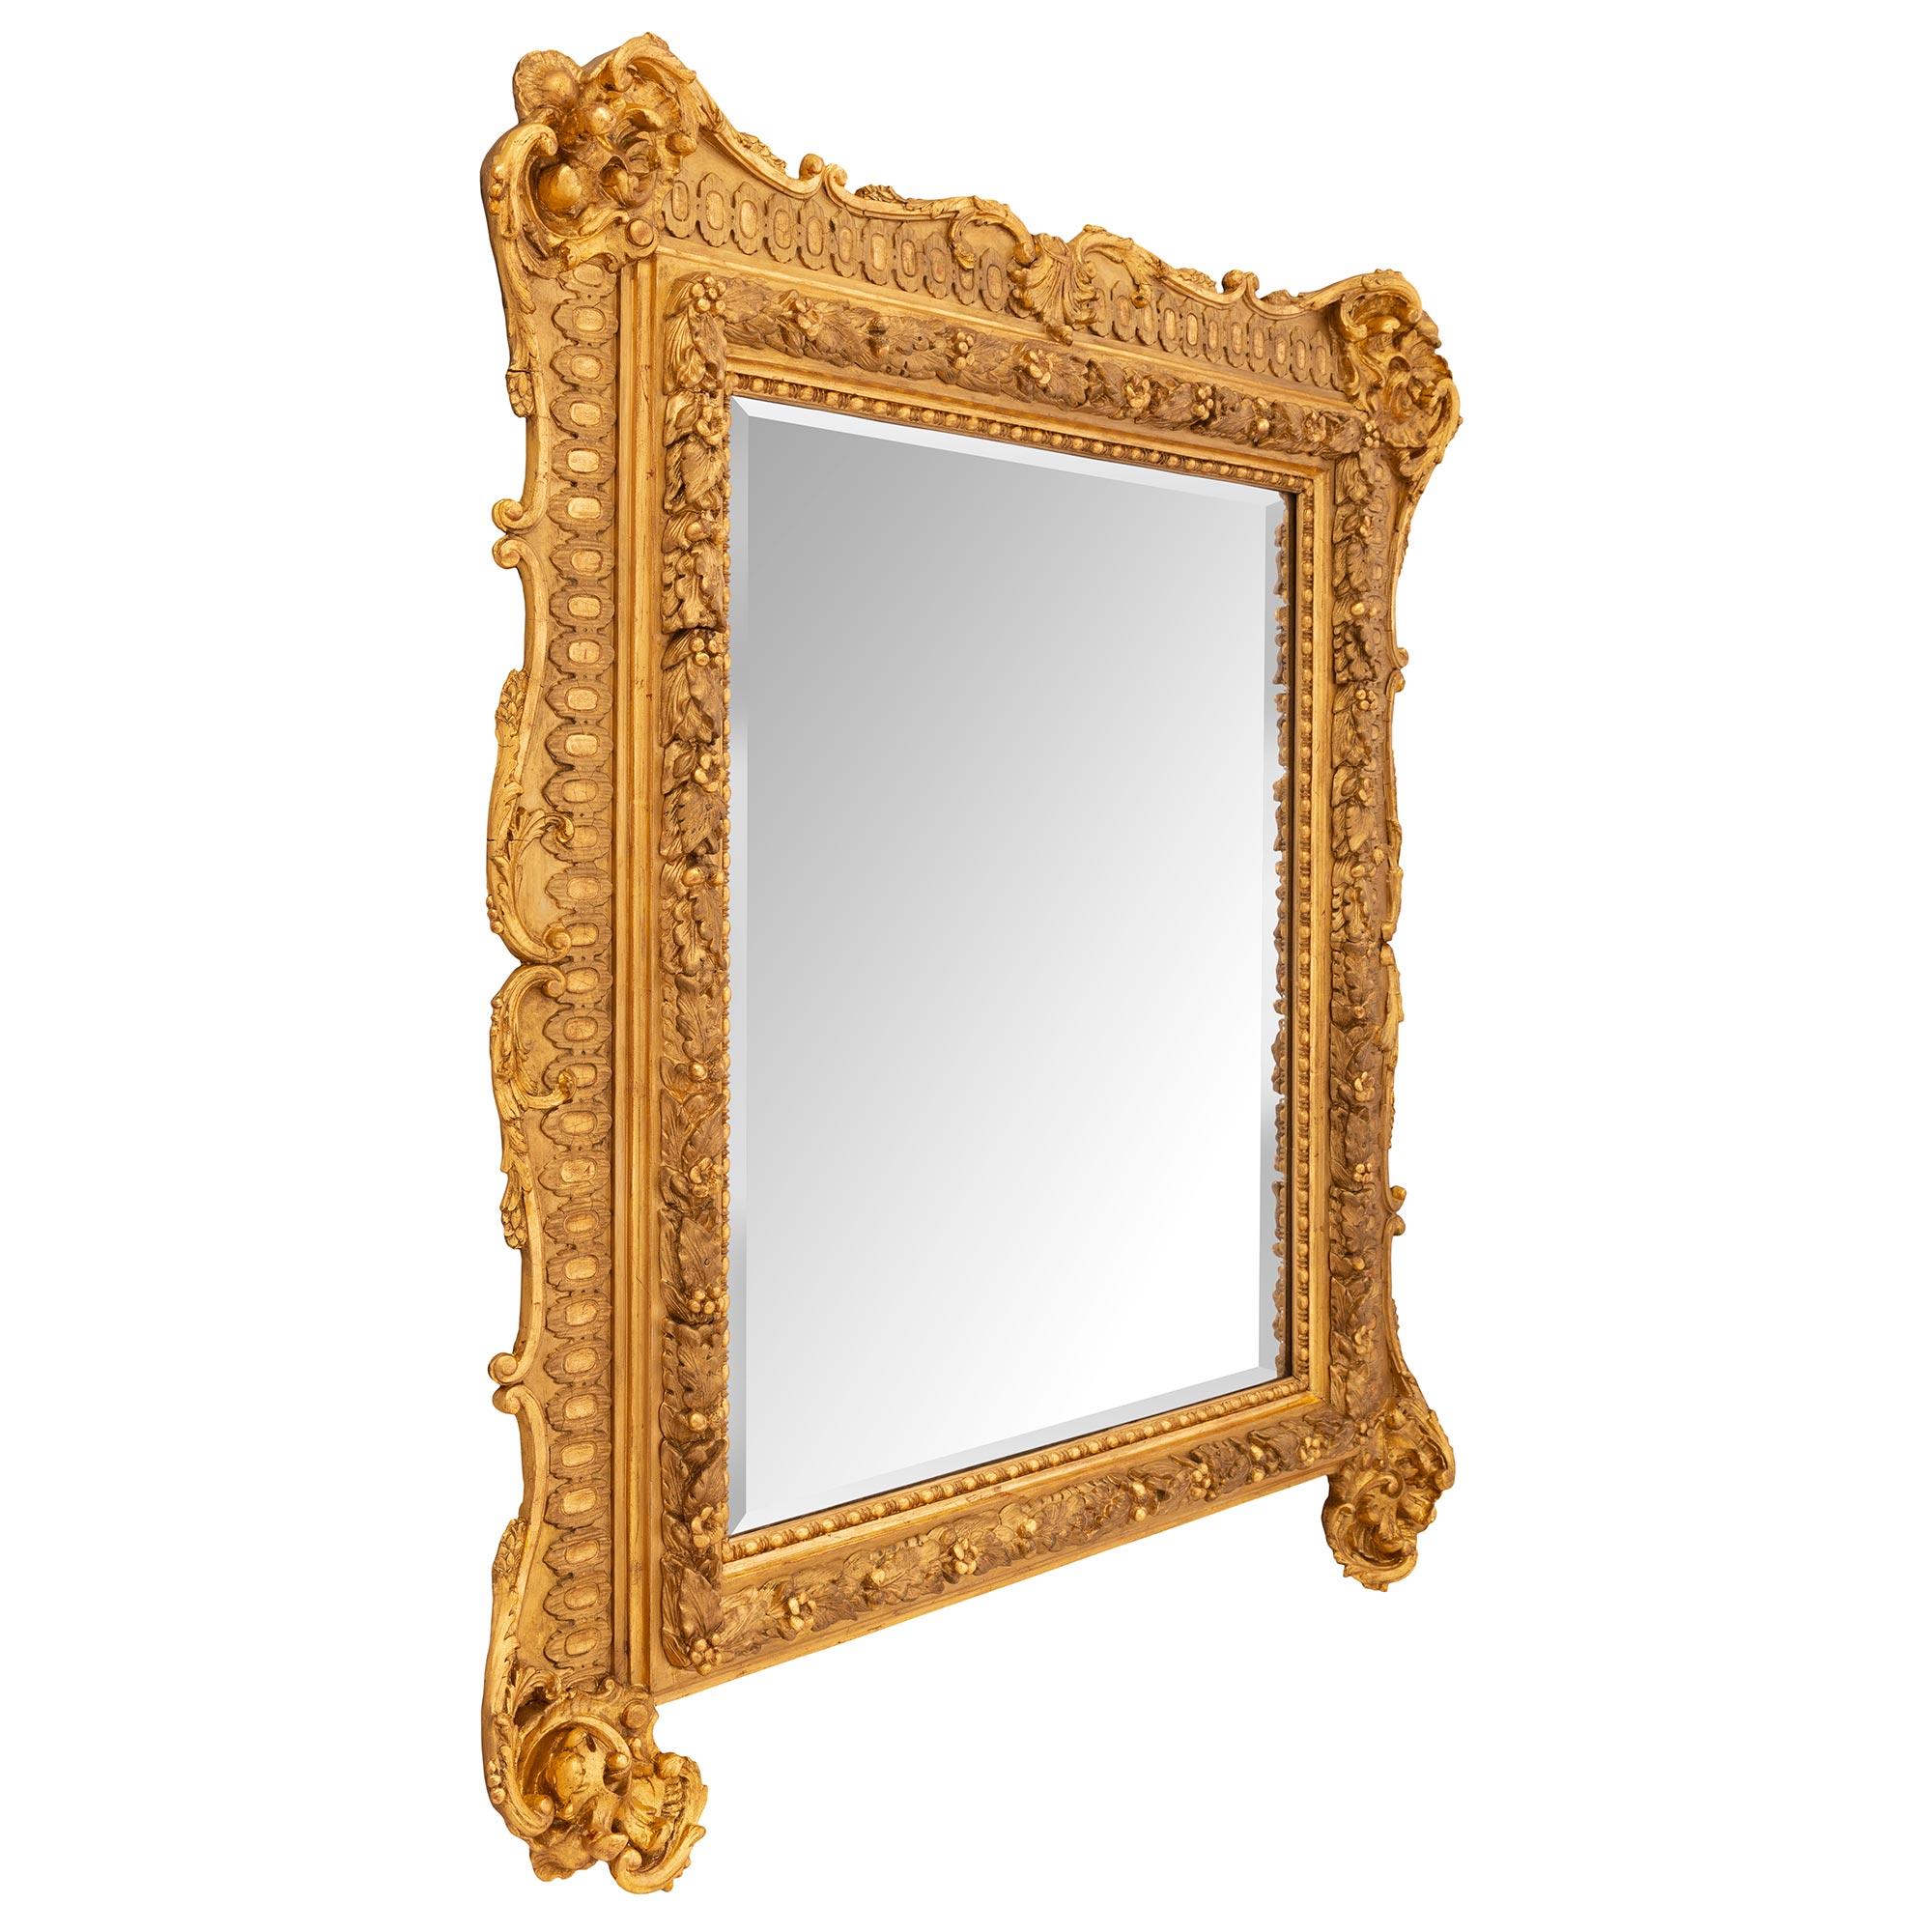 An impressive and most decorative French mid 19th century Louis XV st. giltwood mirror. The mirror retains its original beveled mirror plate set within a most elegant mottled frame with a fine beaded and fluted wrap around band. A striking richly